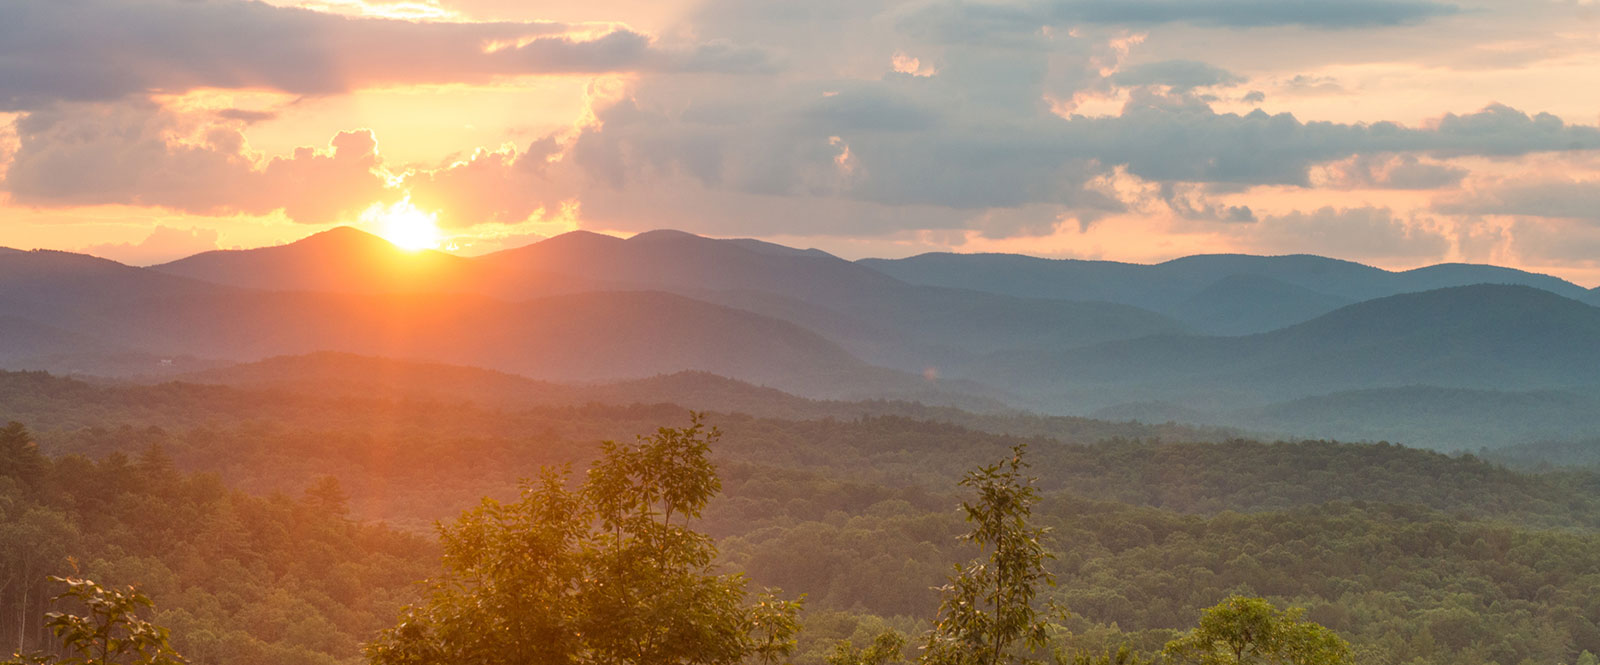 Sunset over the Blue Ridge Mountains.